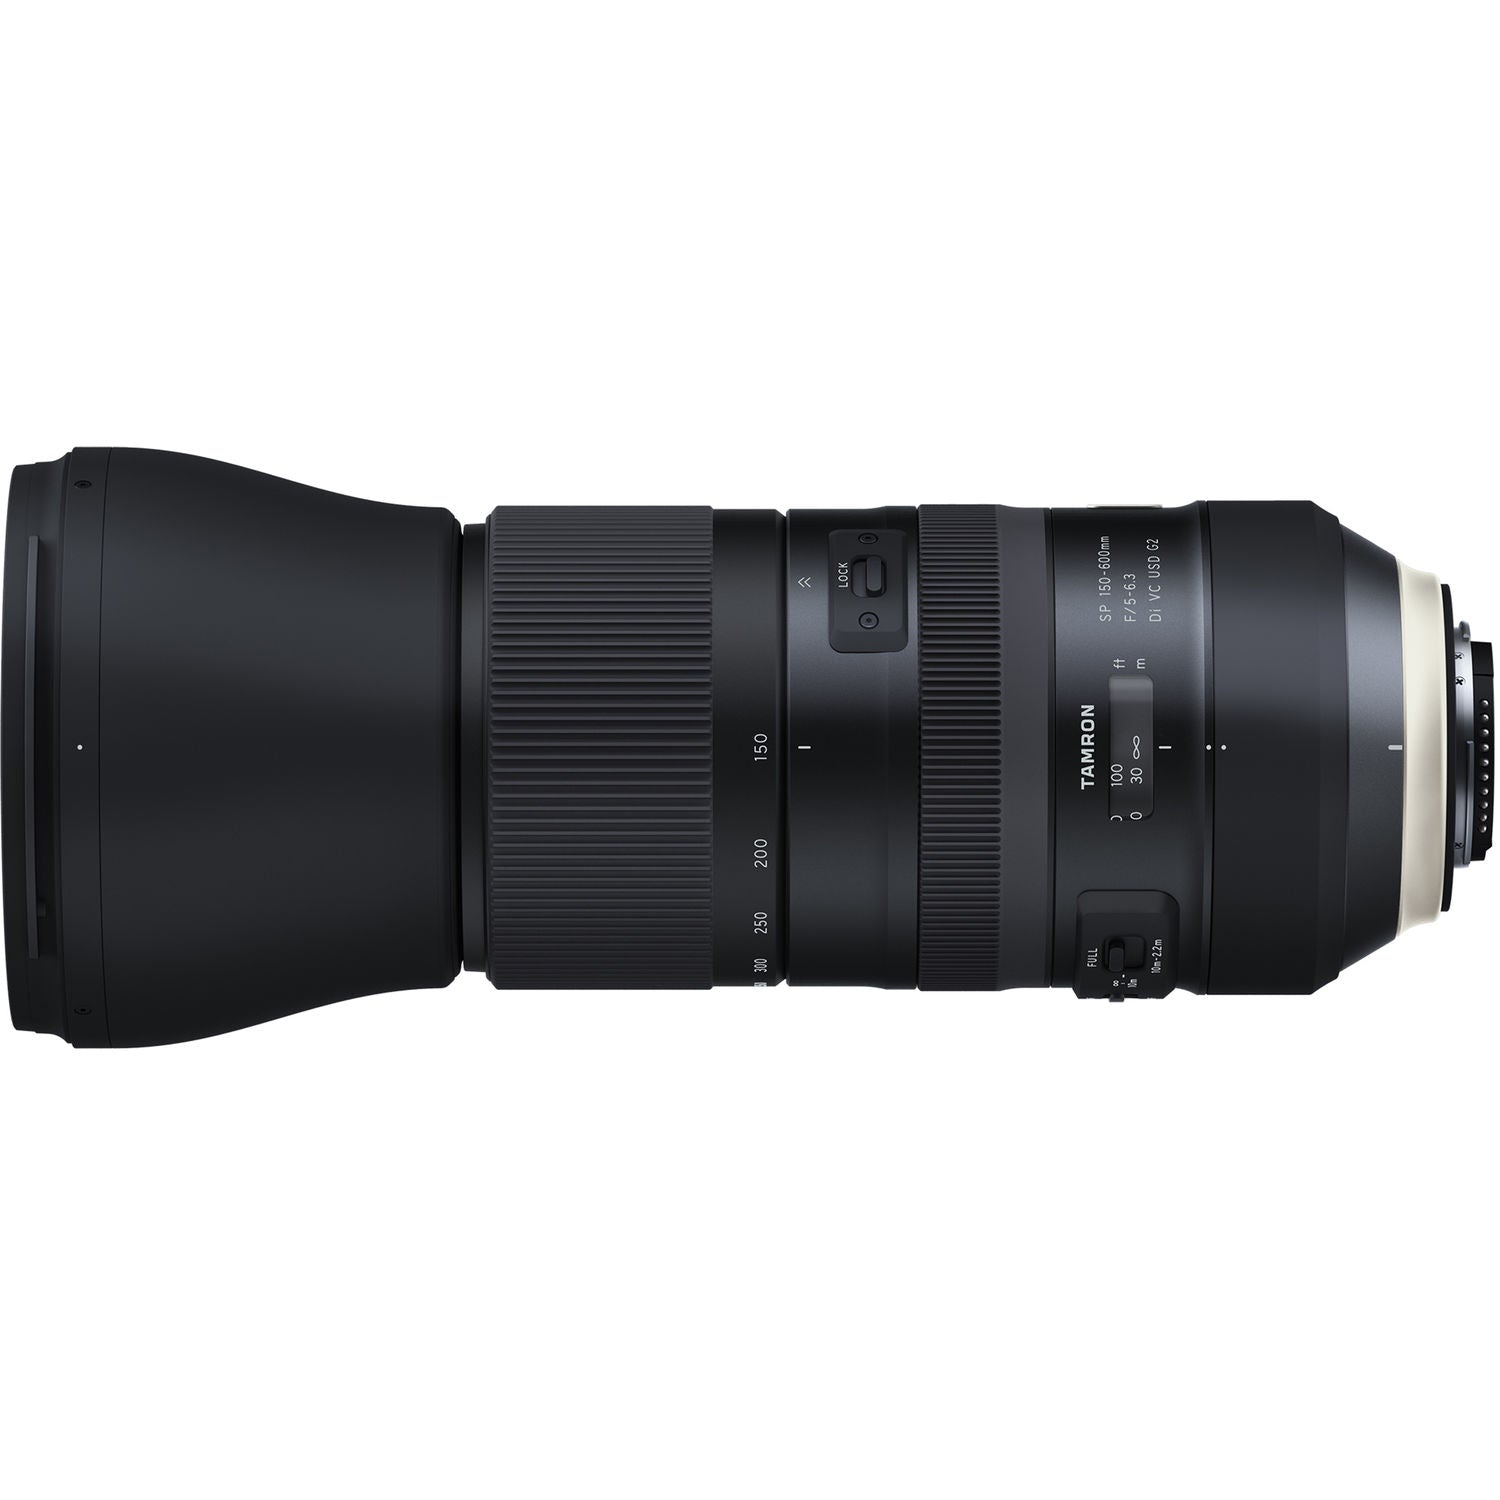 Tamron AF SP 150-600/5.0-6.3 Di VC USD G2 for Canon (A022E)